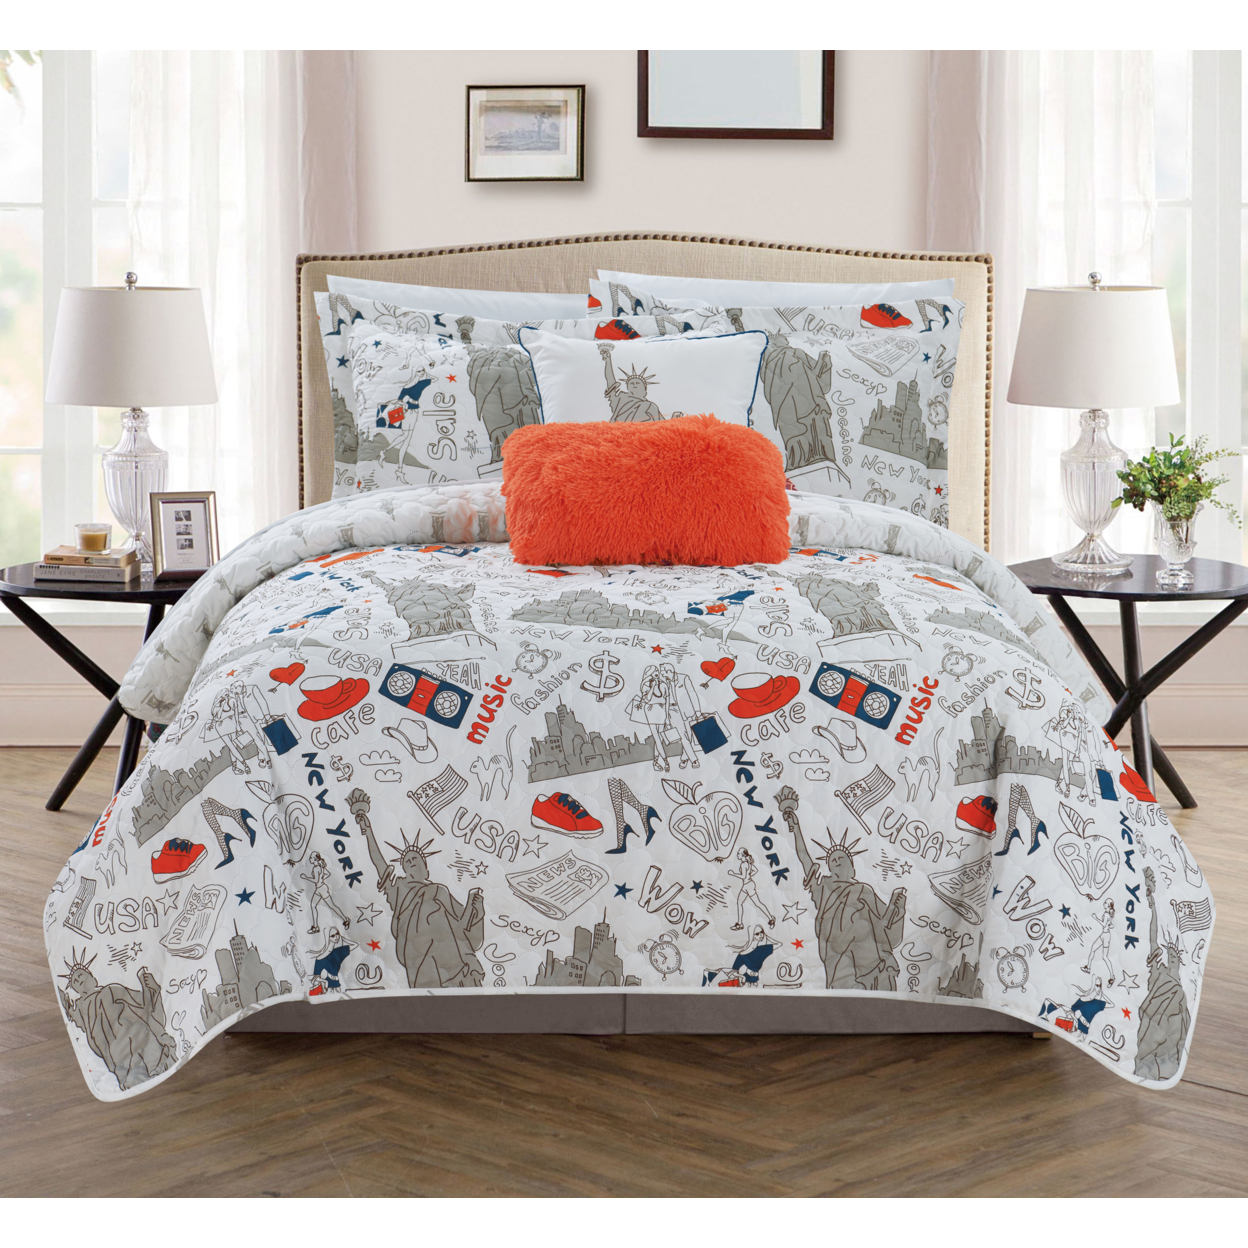 Bay Park 5 Or 4 Piece Reversible Quilt Set Bay Park City Inspired Printed Design Coverlet Bedding - Navy, Queen